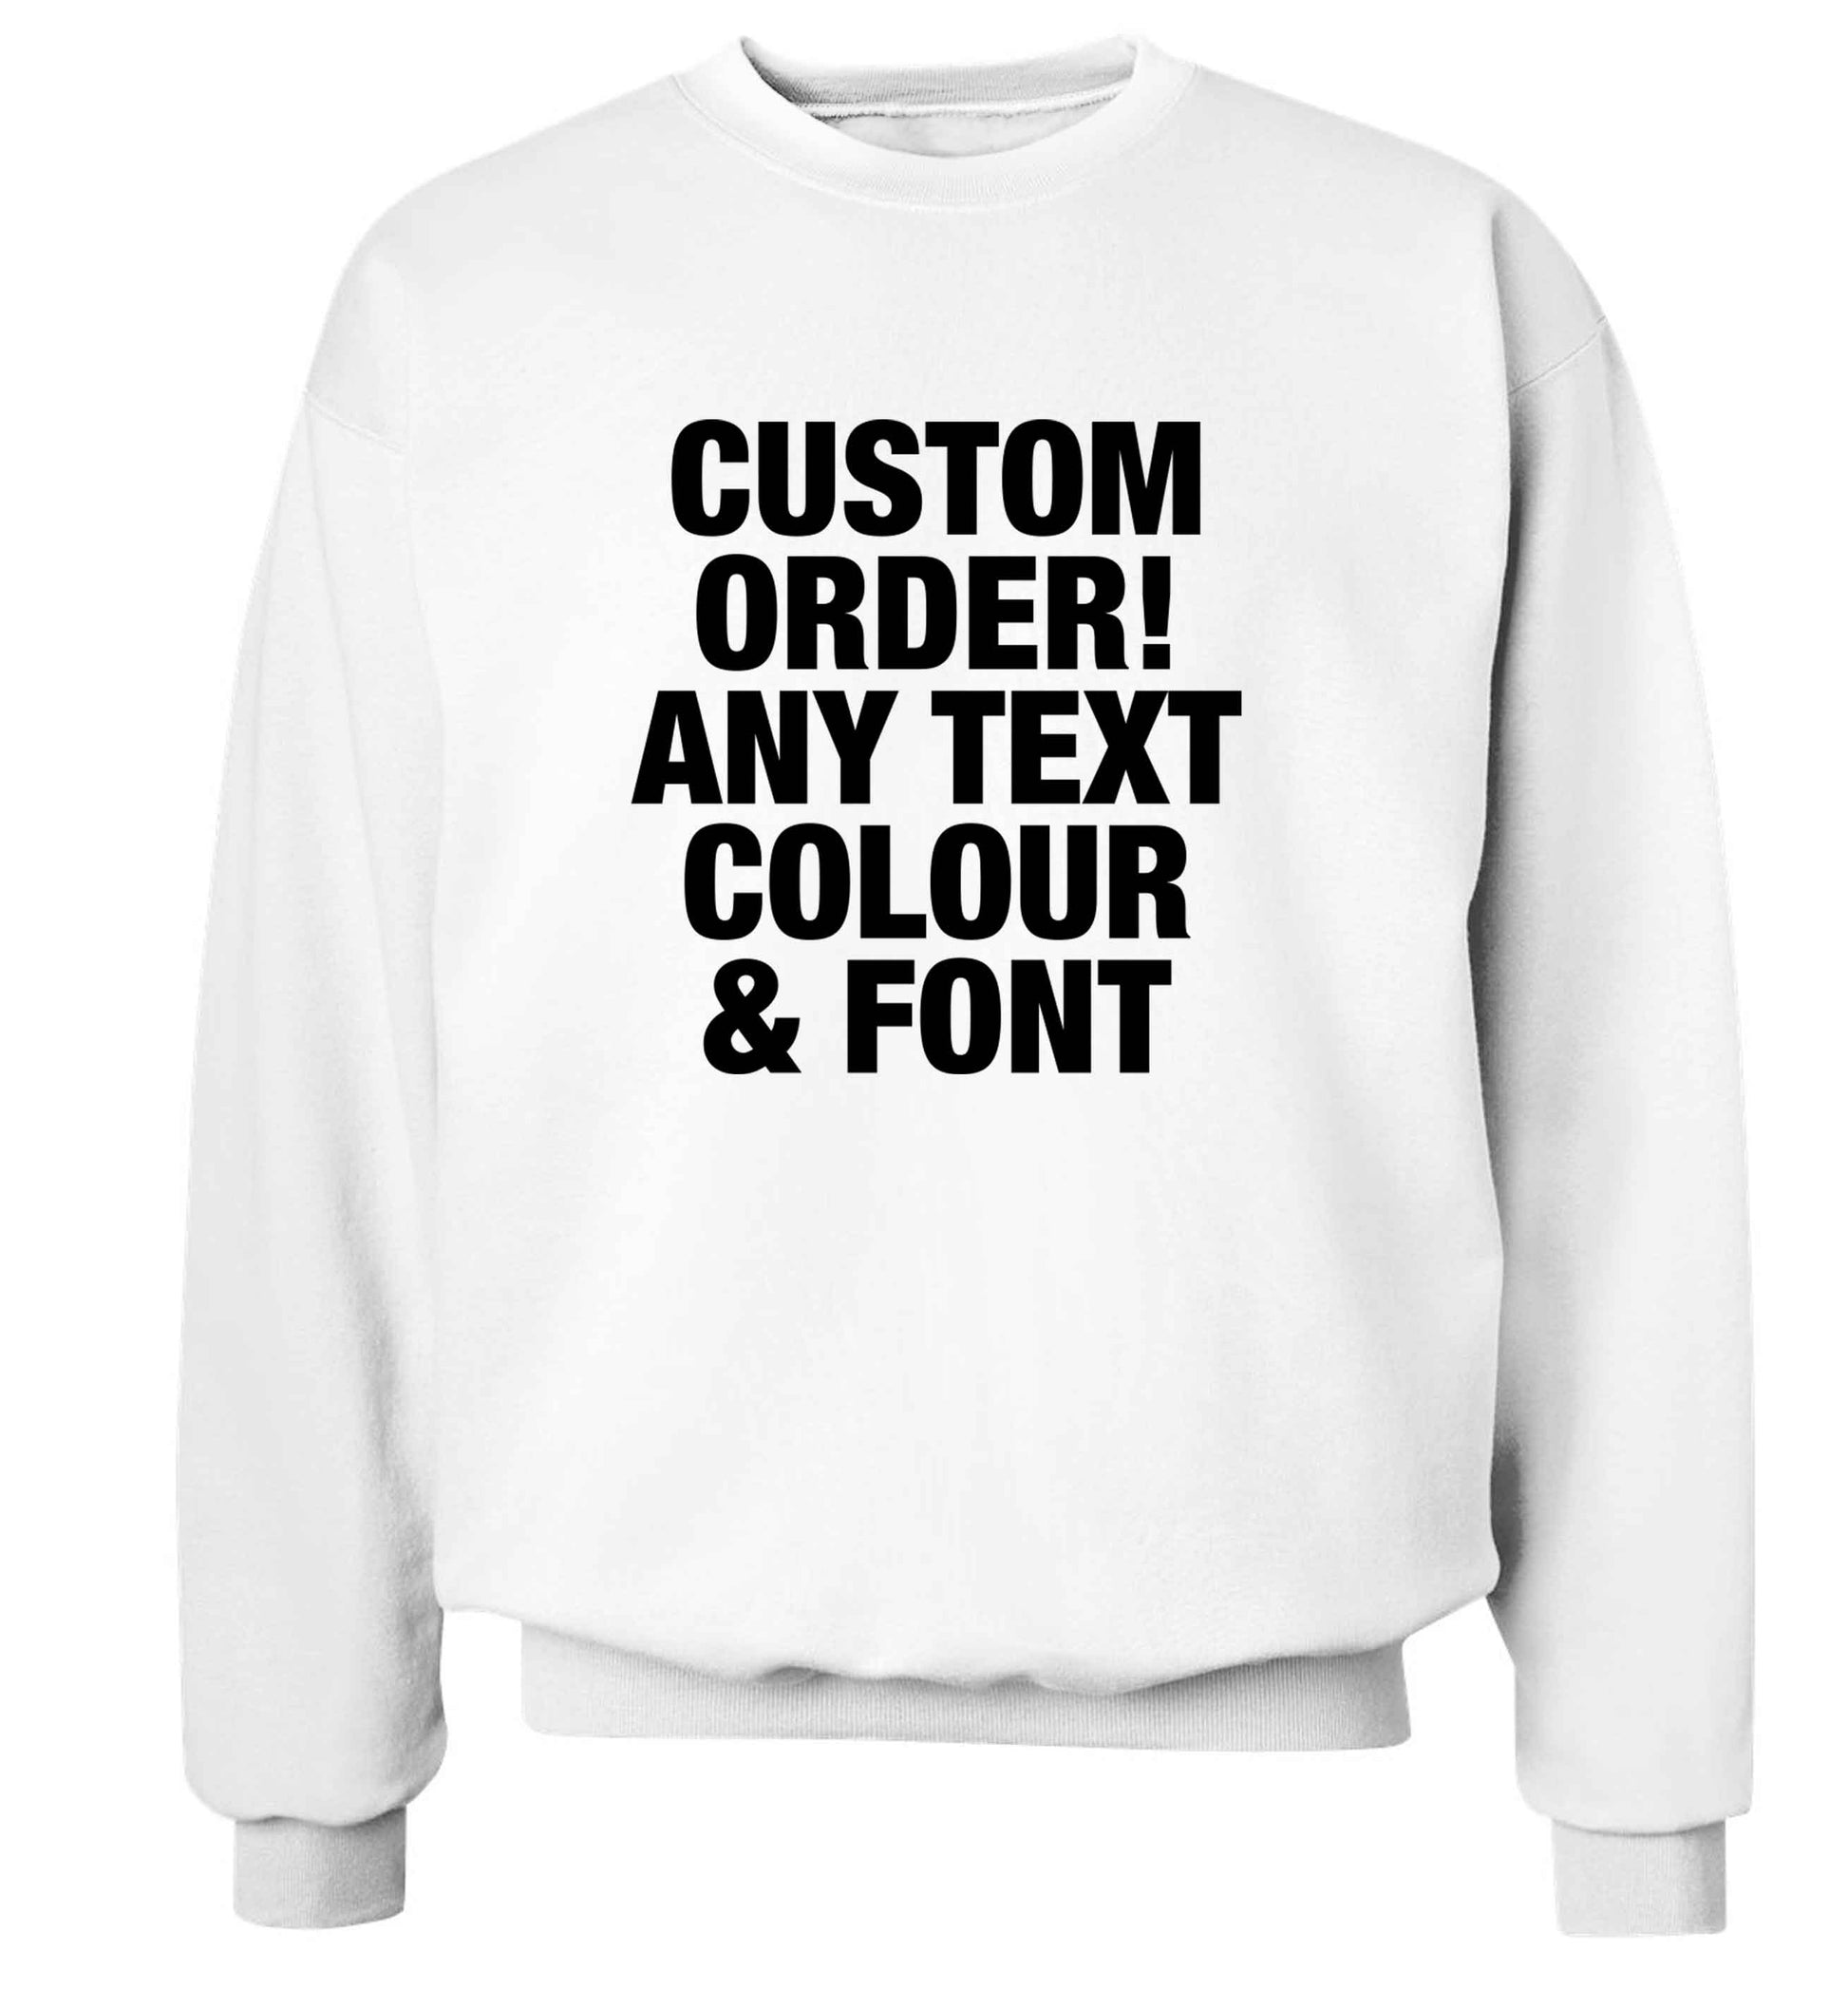 Custom order any text colour and font adult's unisex white sweater 2XL